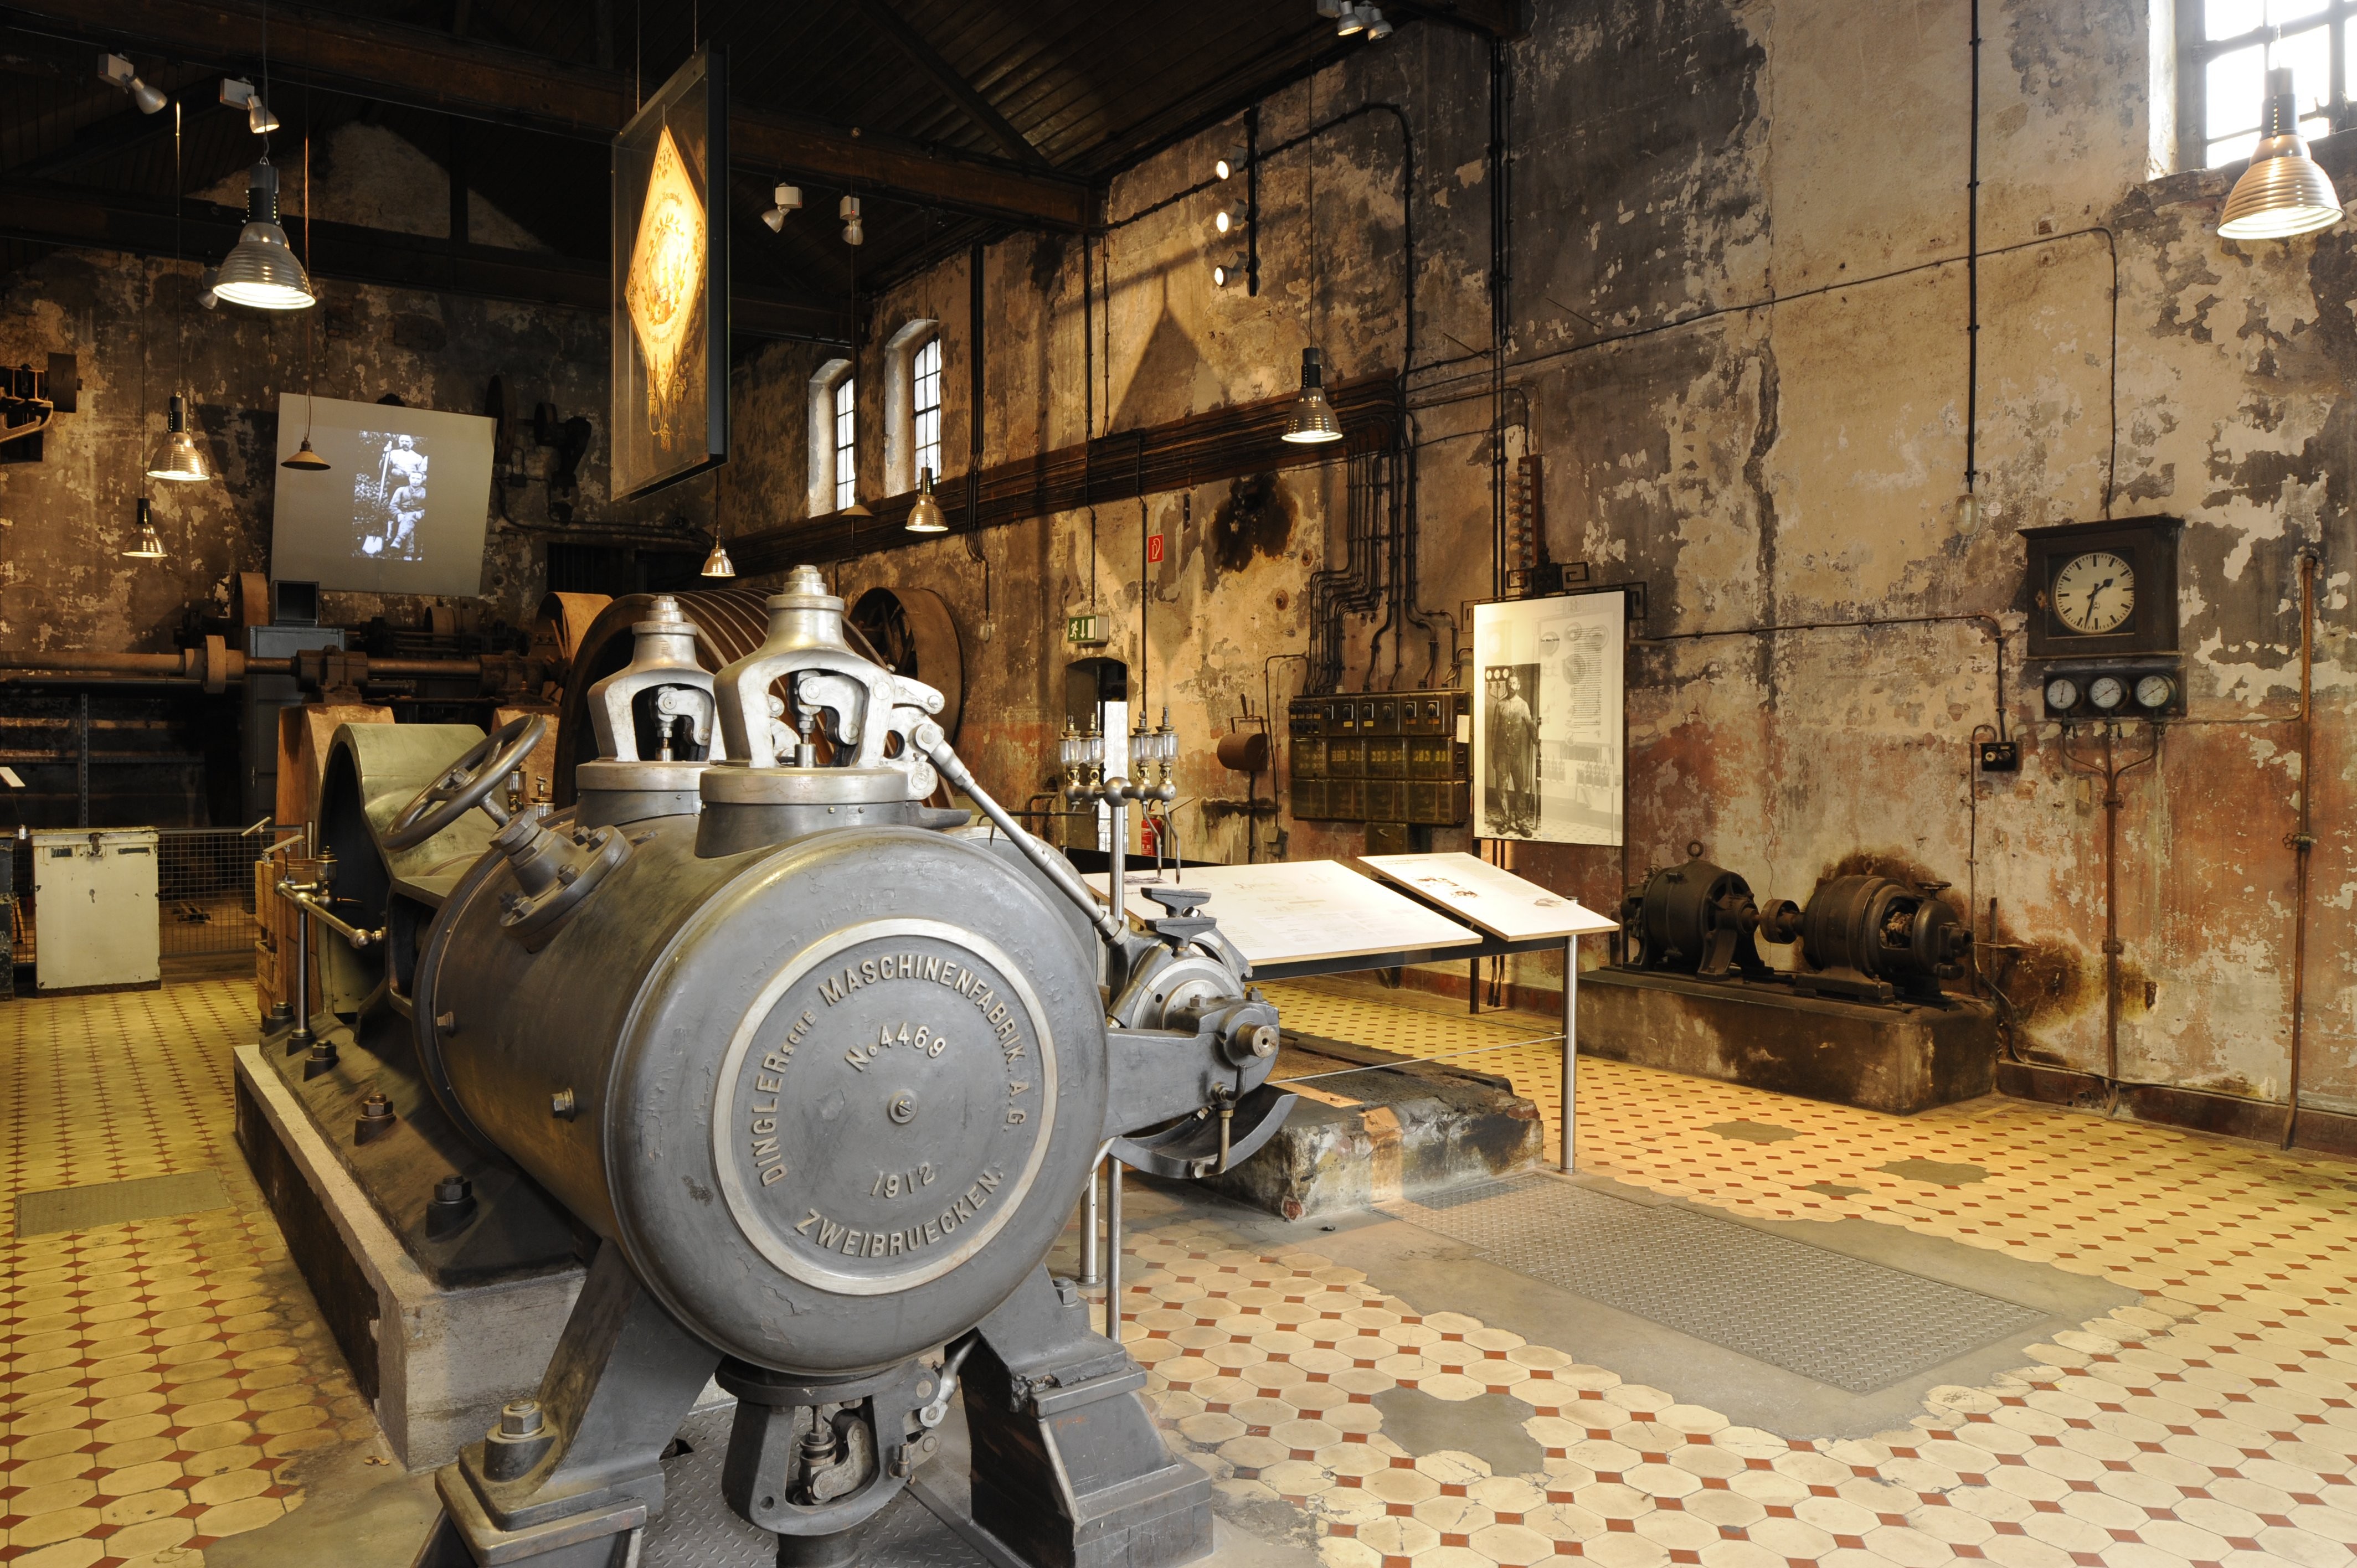 The steam engine installed at Gesenkschmiede Hendrichs (Drop Forge) in 1910 was scrapped in the mid-1950s. All that remains is the engine house with all its traces of history. A steam engine of the same type has been set up for the museum exhibition. 